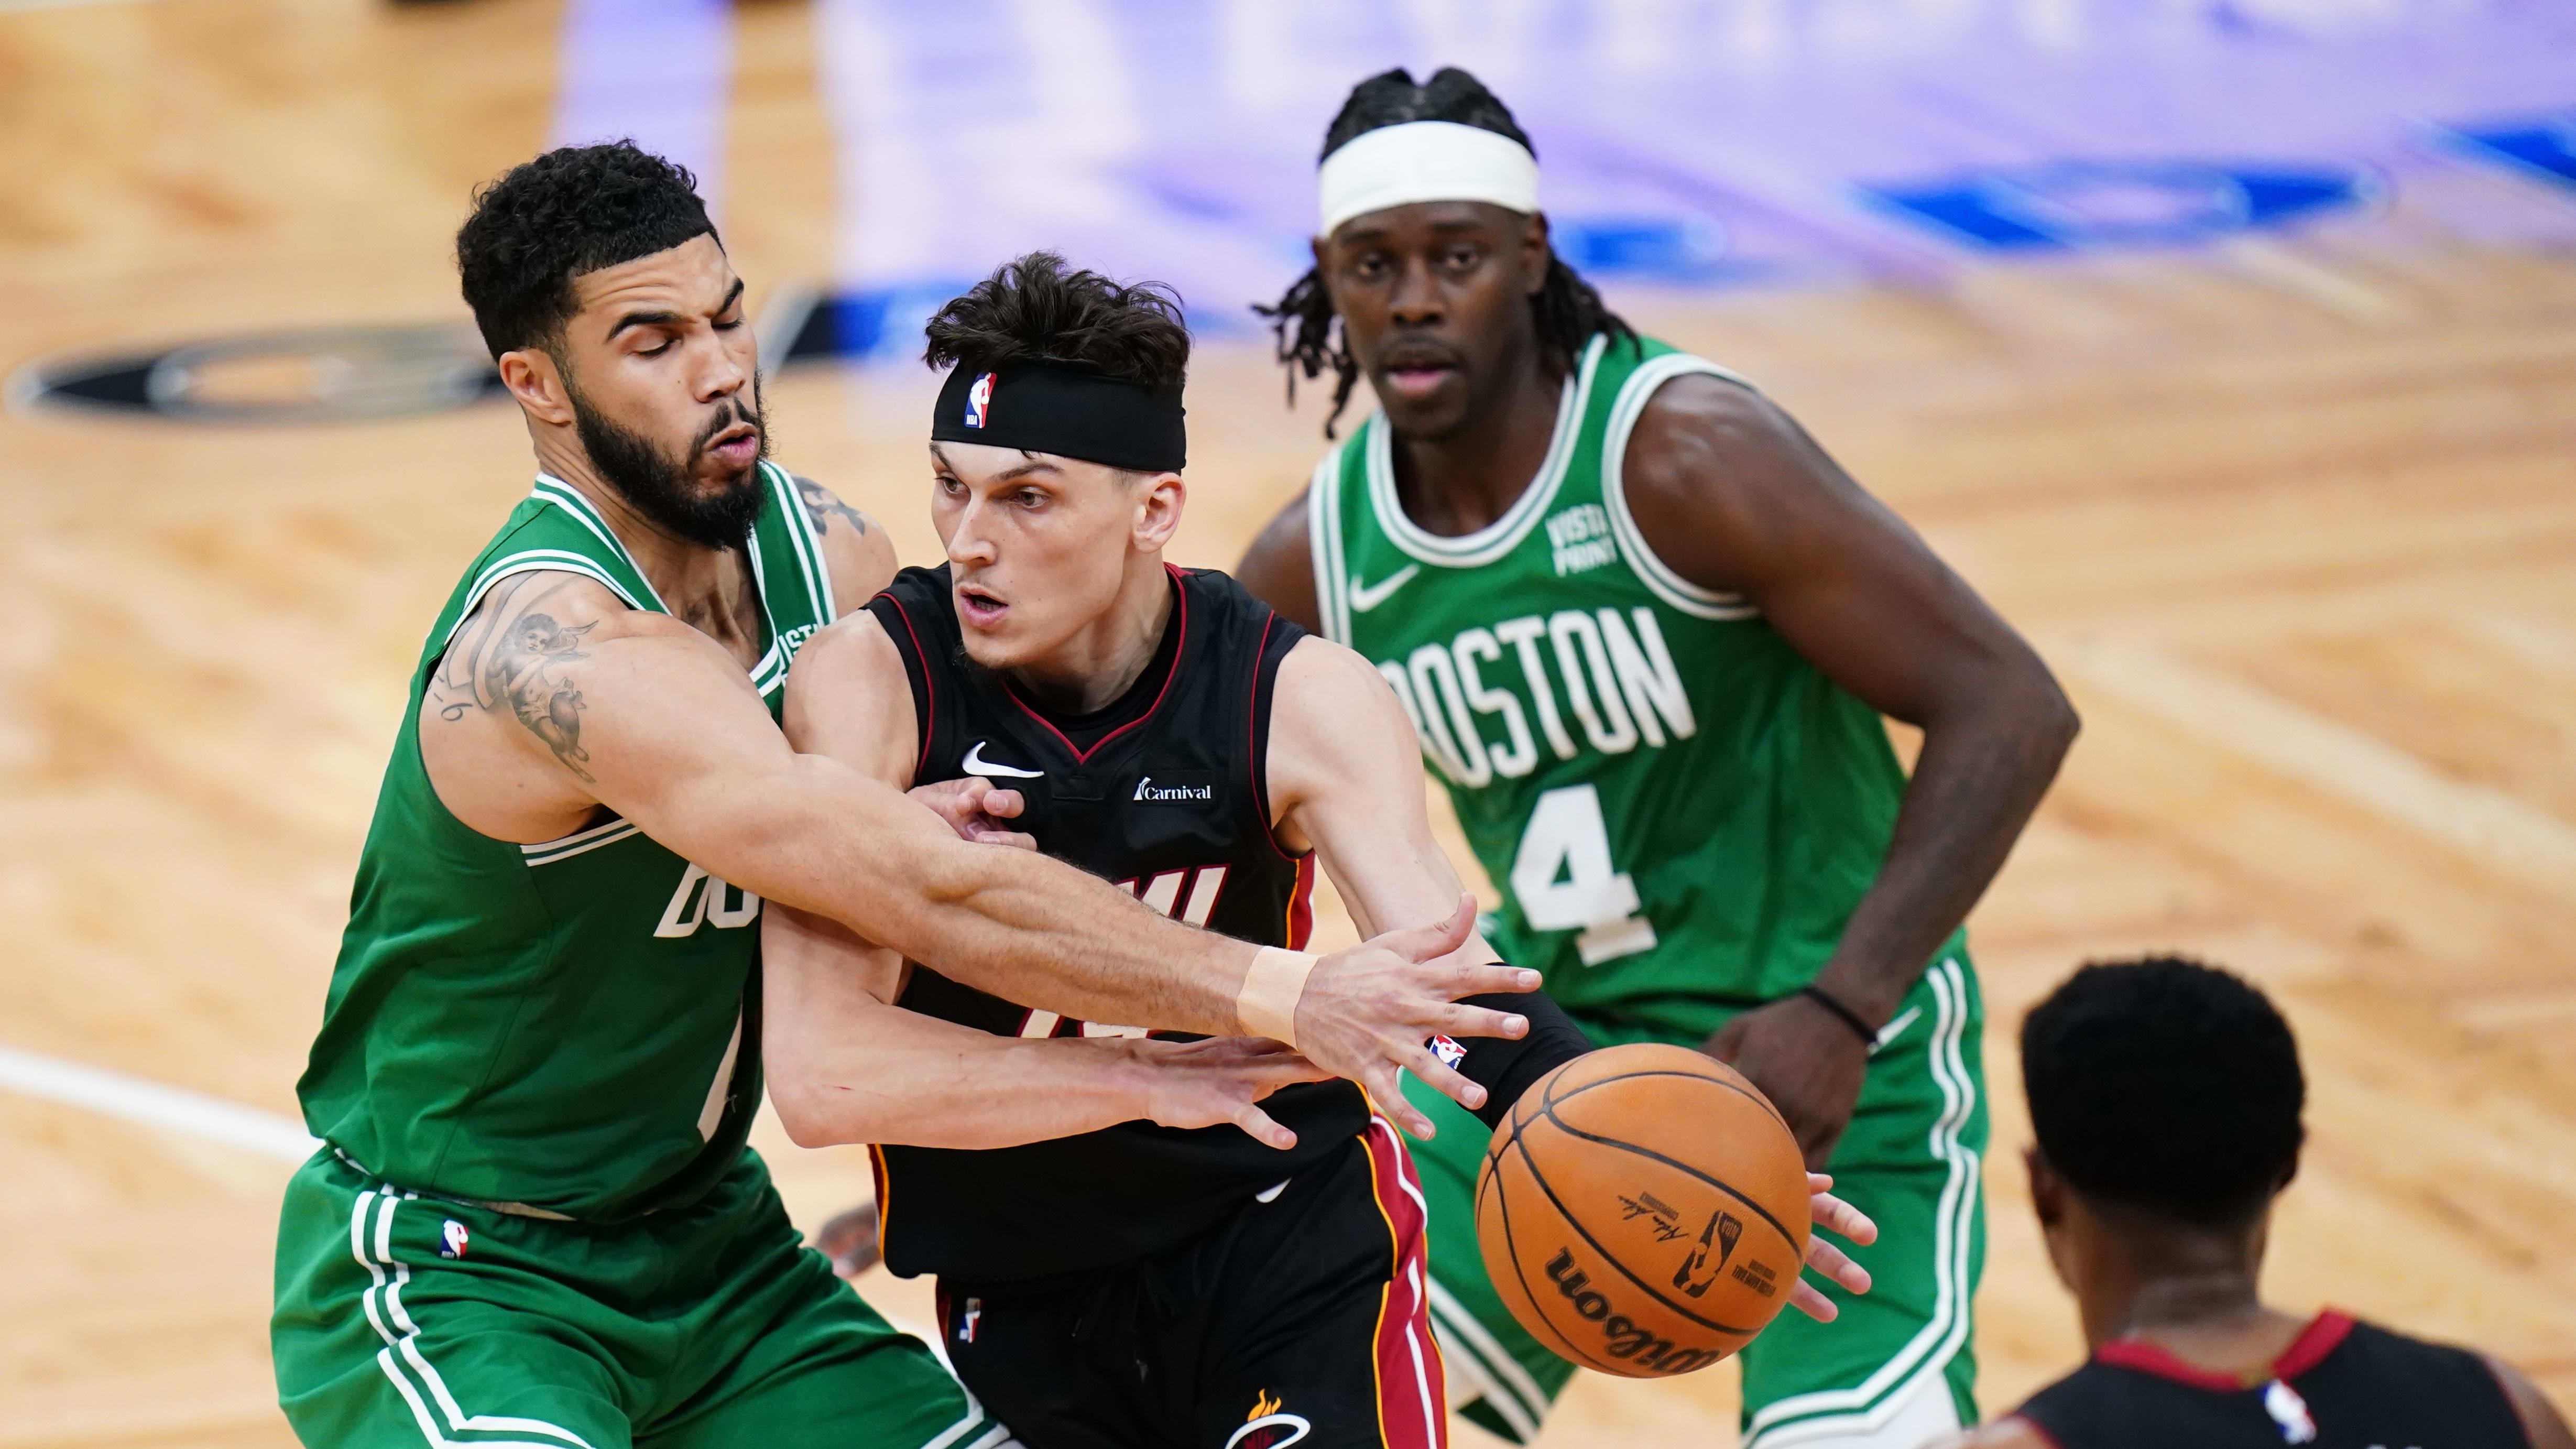 In Order To Go Up 2-1, The Miami Heat Feel They Have To Get Past A Strong Response From Boston Celtics In Game 3